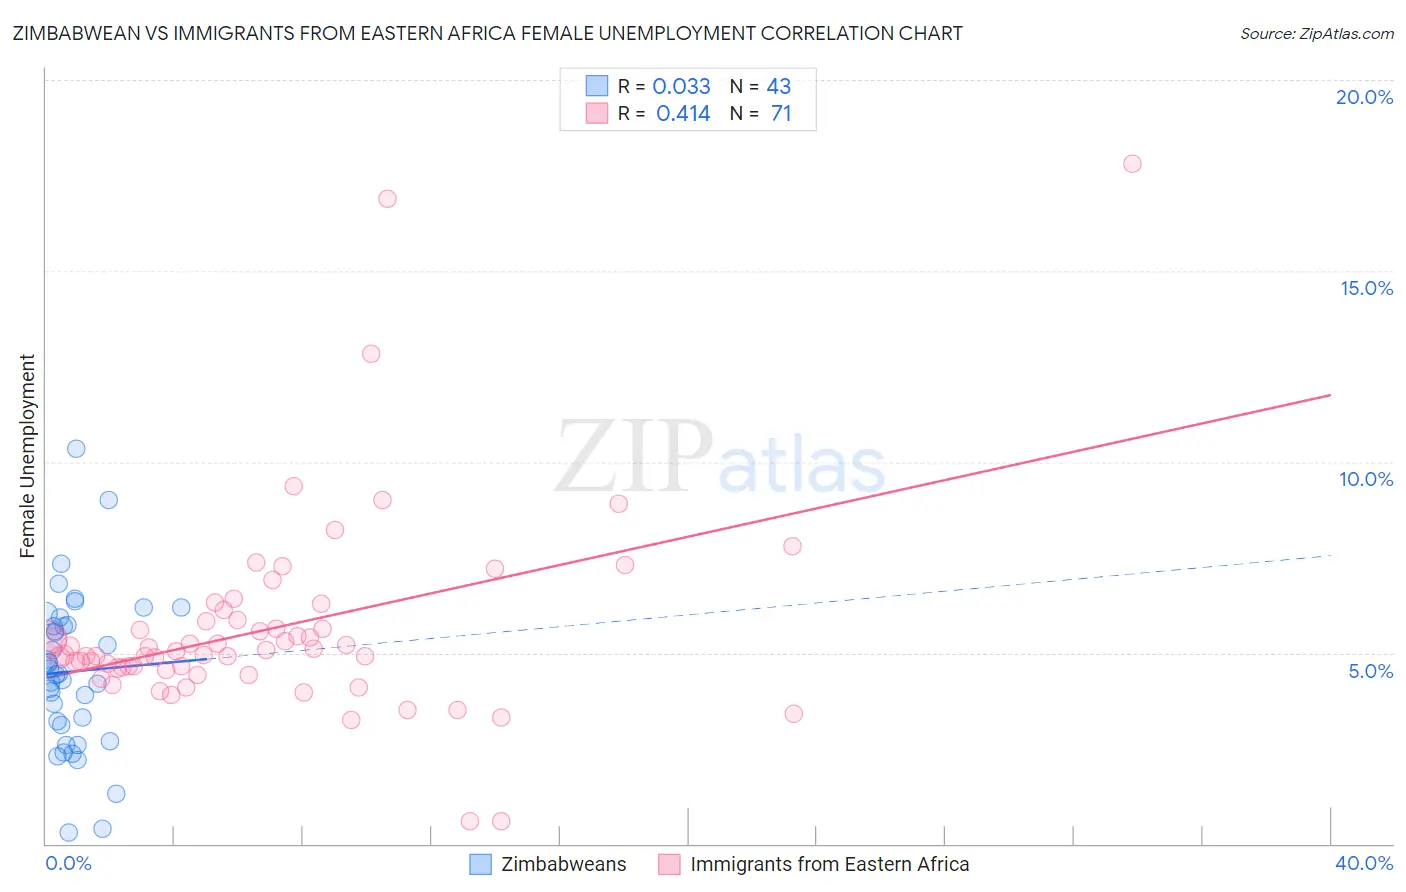 Zimbabwean vs Immigrants from Eastern Africa Female Unemployment